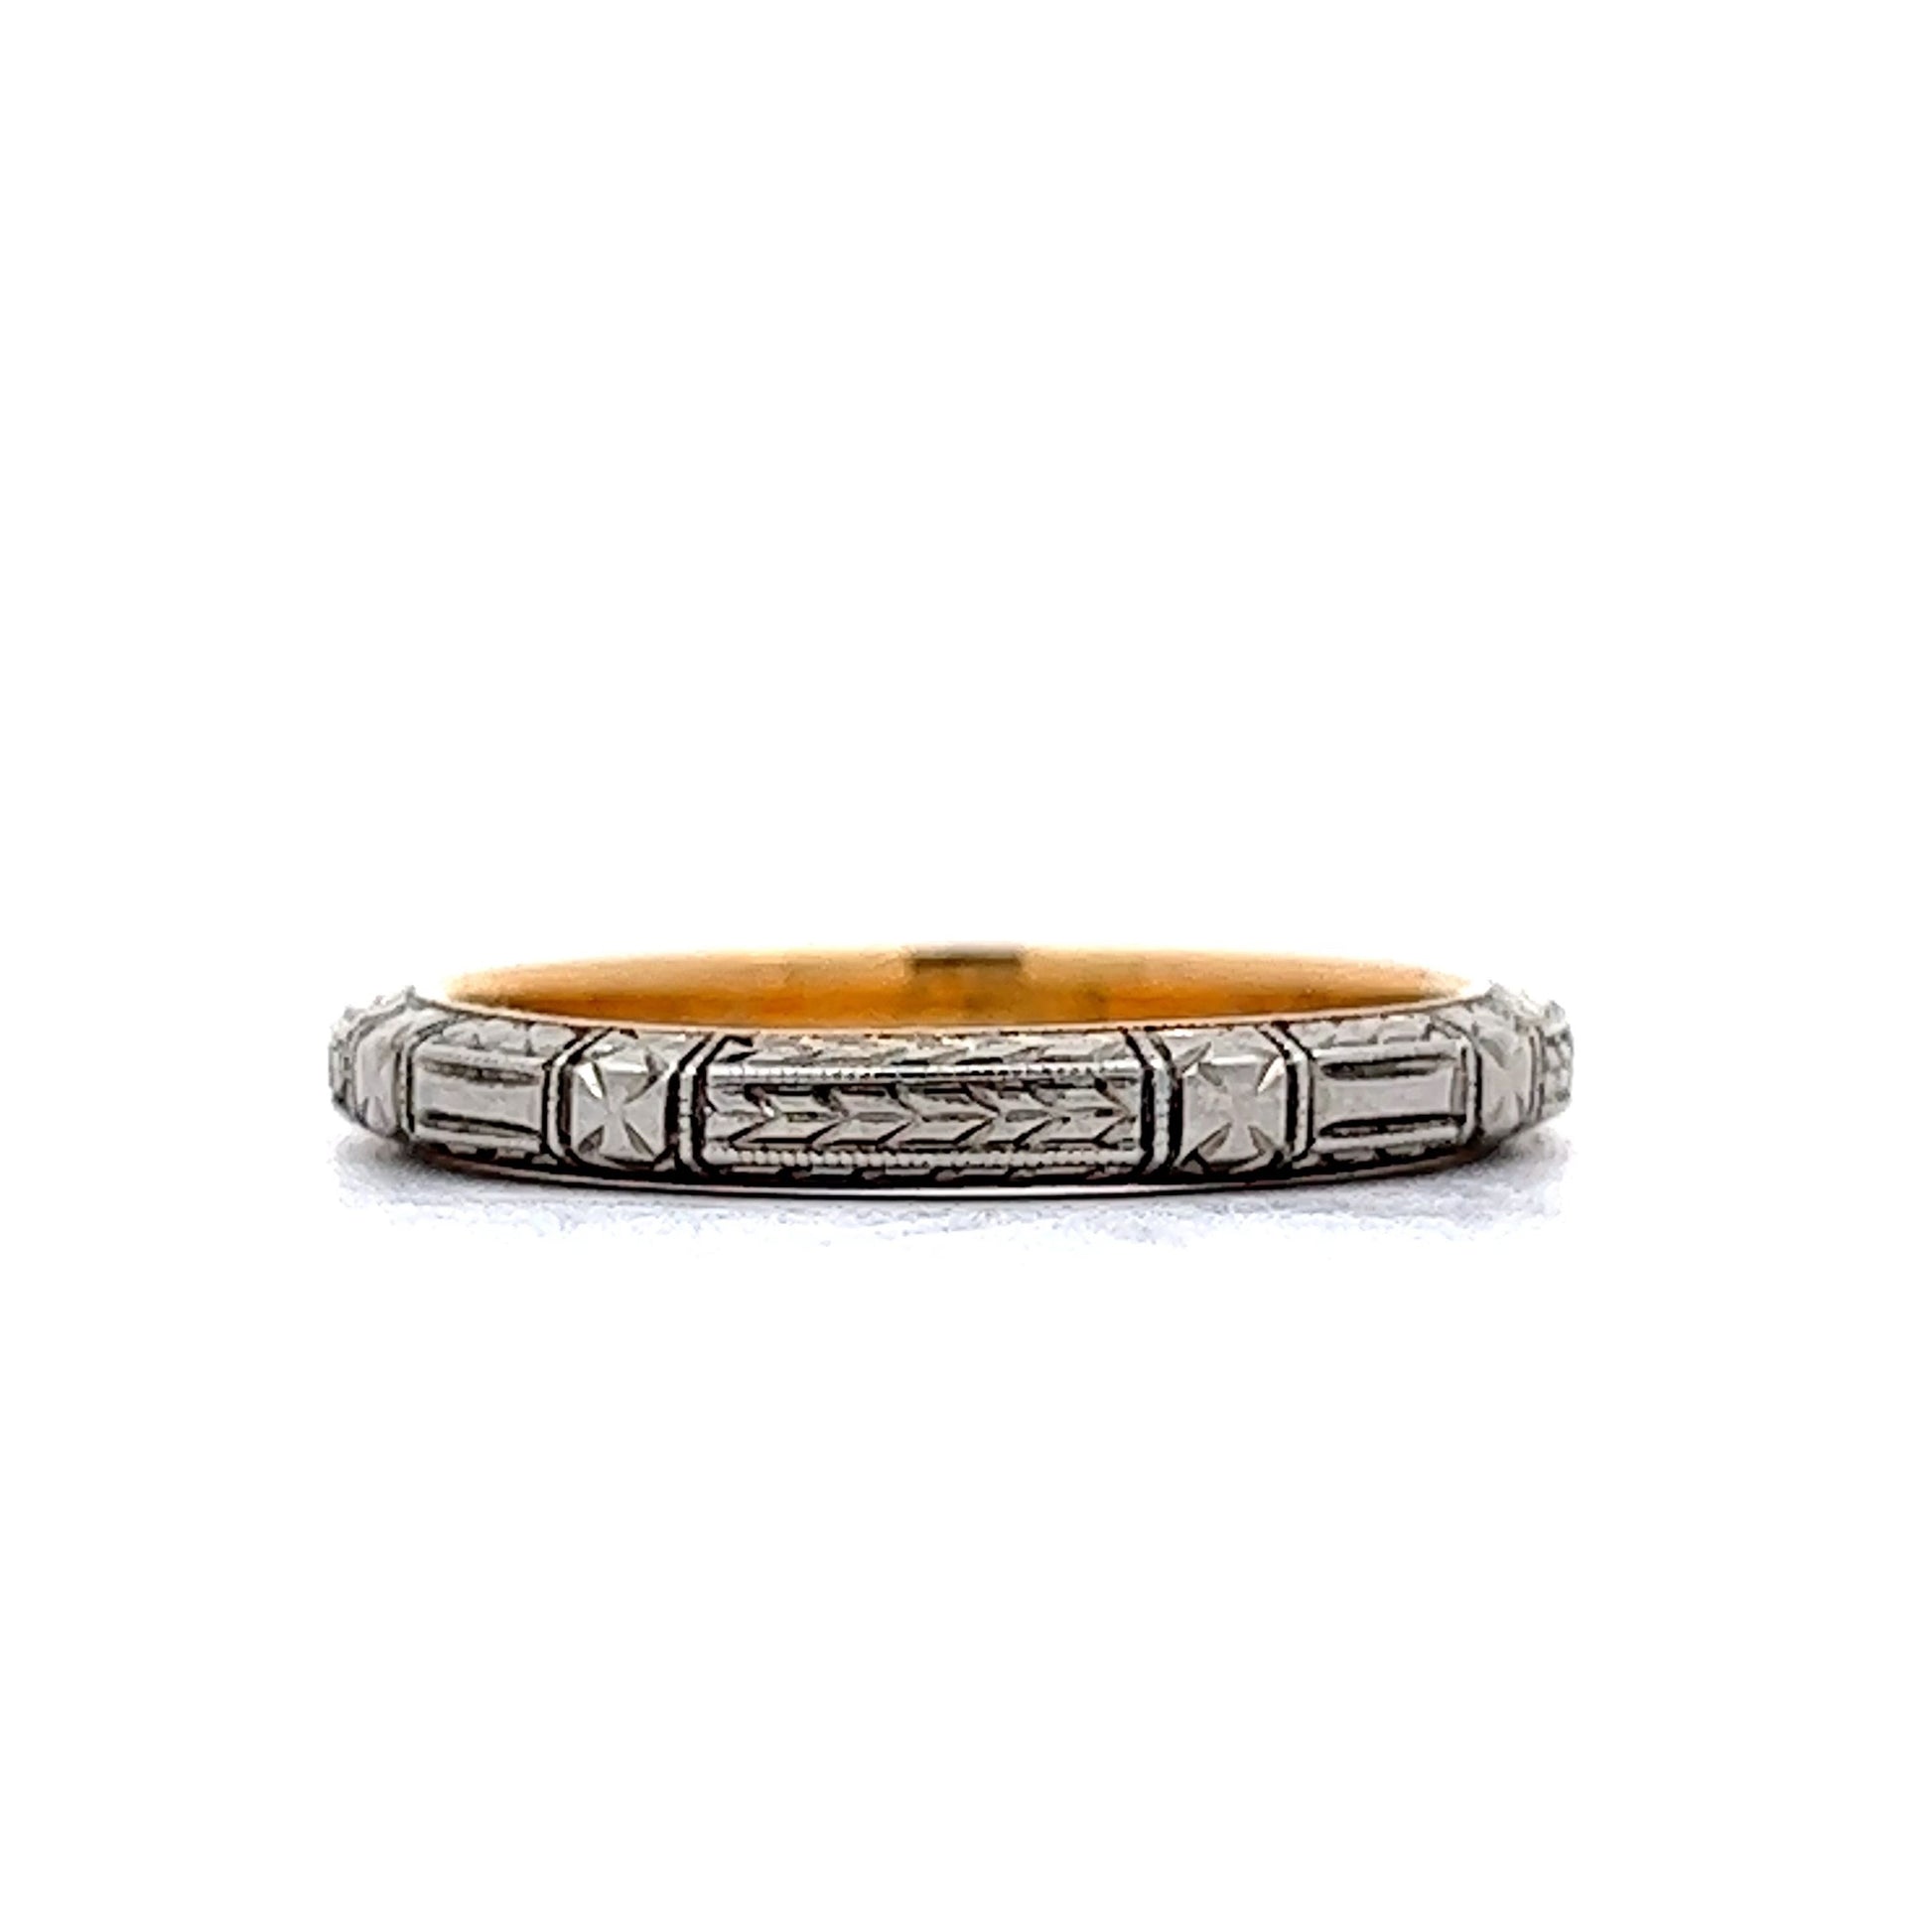 Unique Men's Wedding Band with Engraved Geometric Pattern 18K